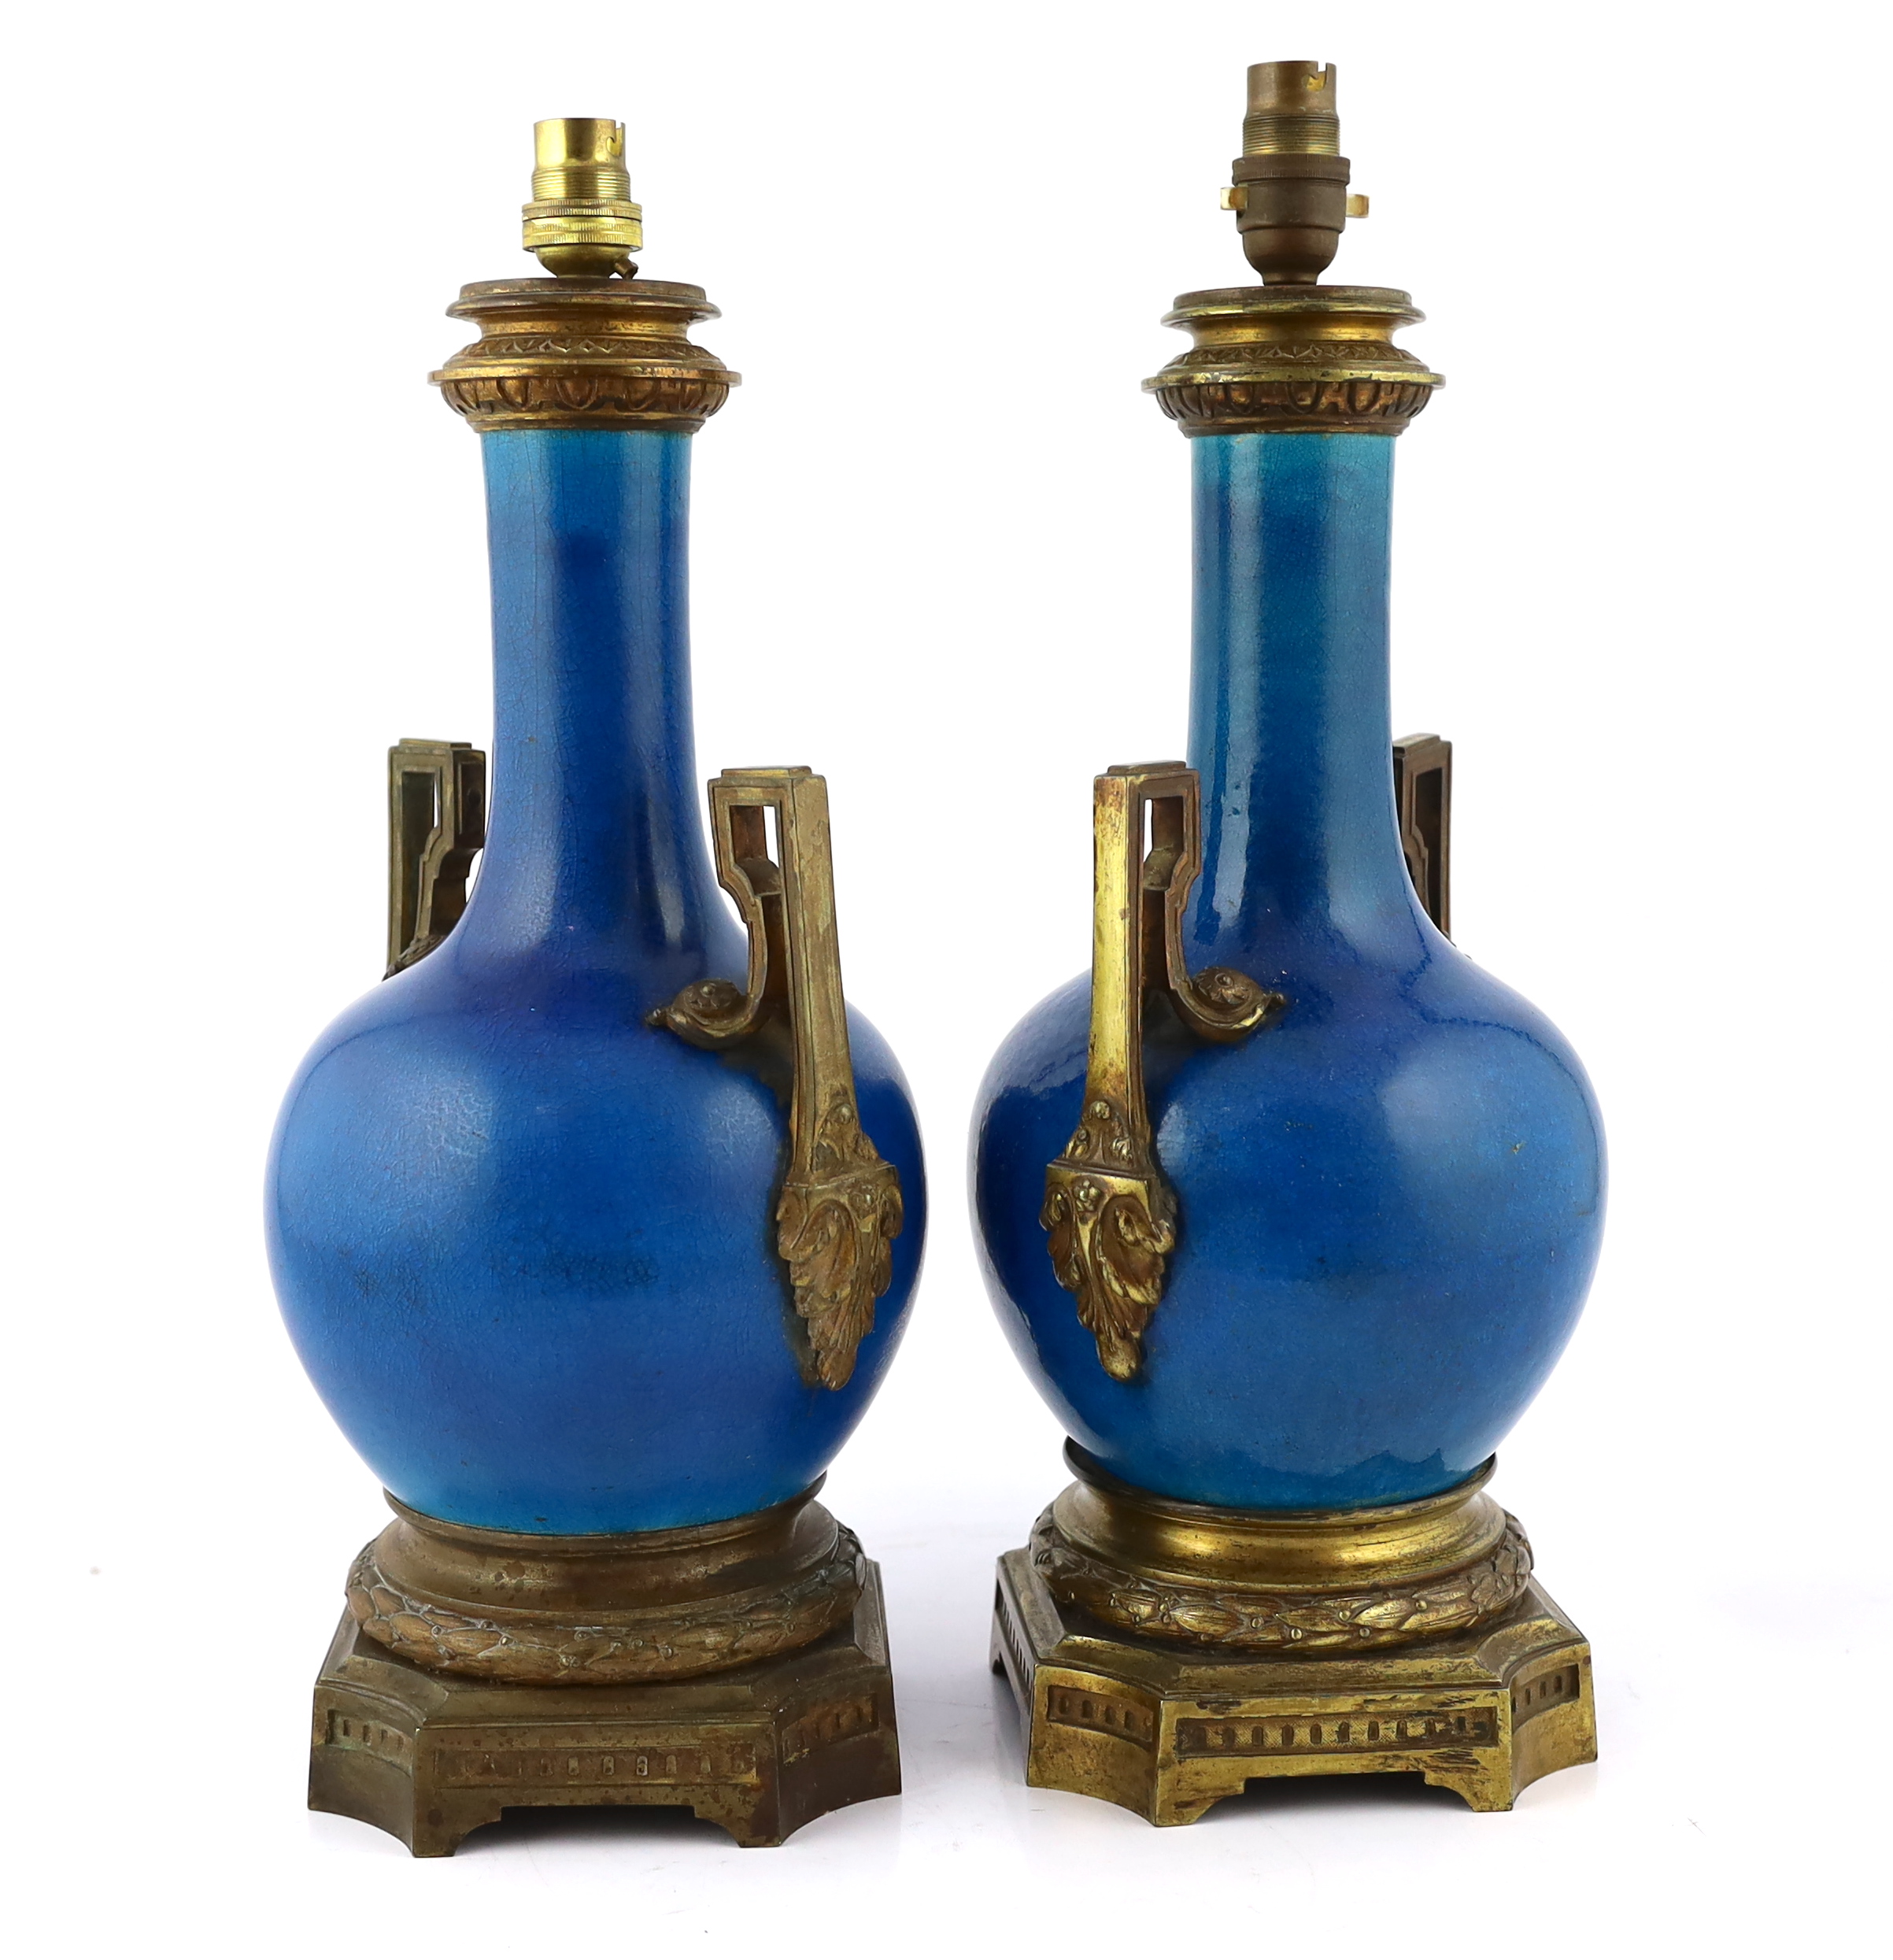 A pair of Chinese or Japanese turquoise-glazed bottle vases with Louis XVI style ormolu lamp mounts, - Image 2 of 4